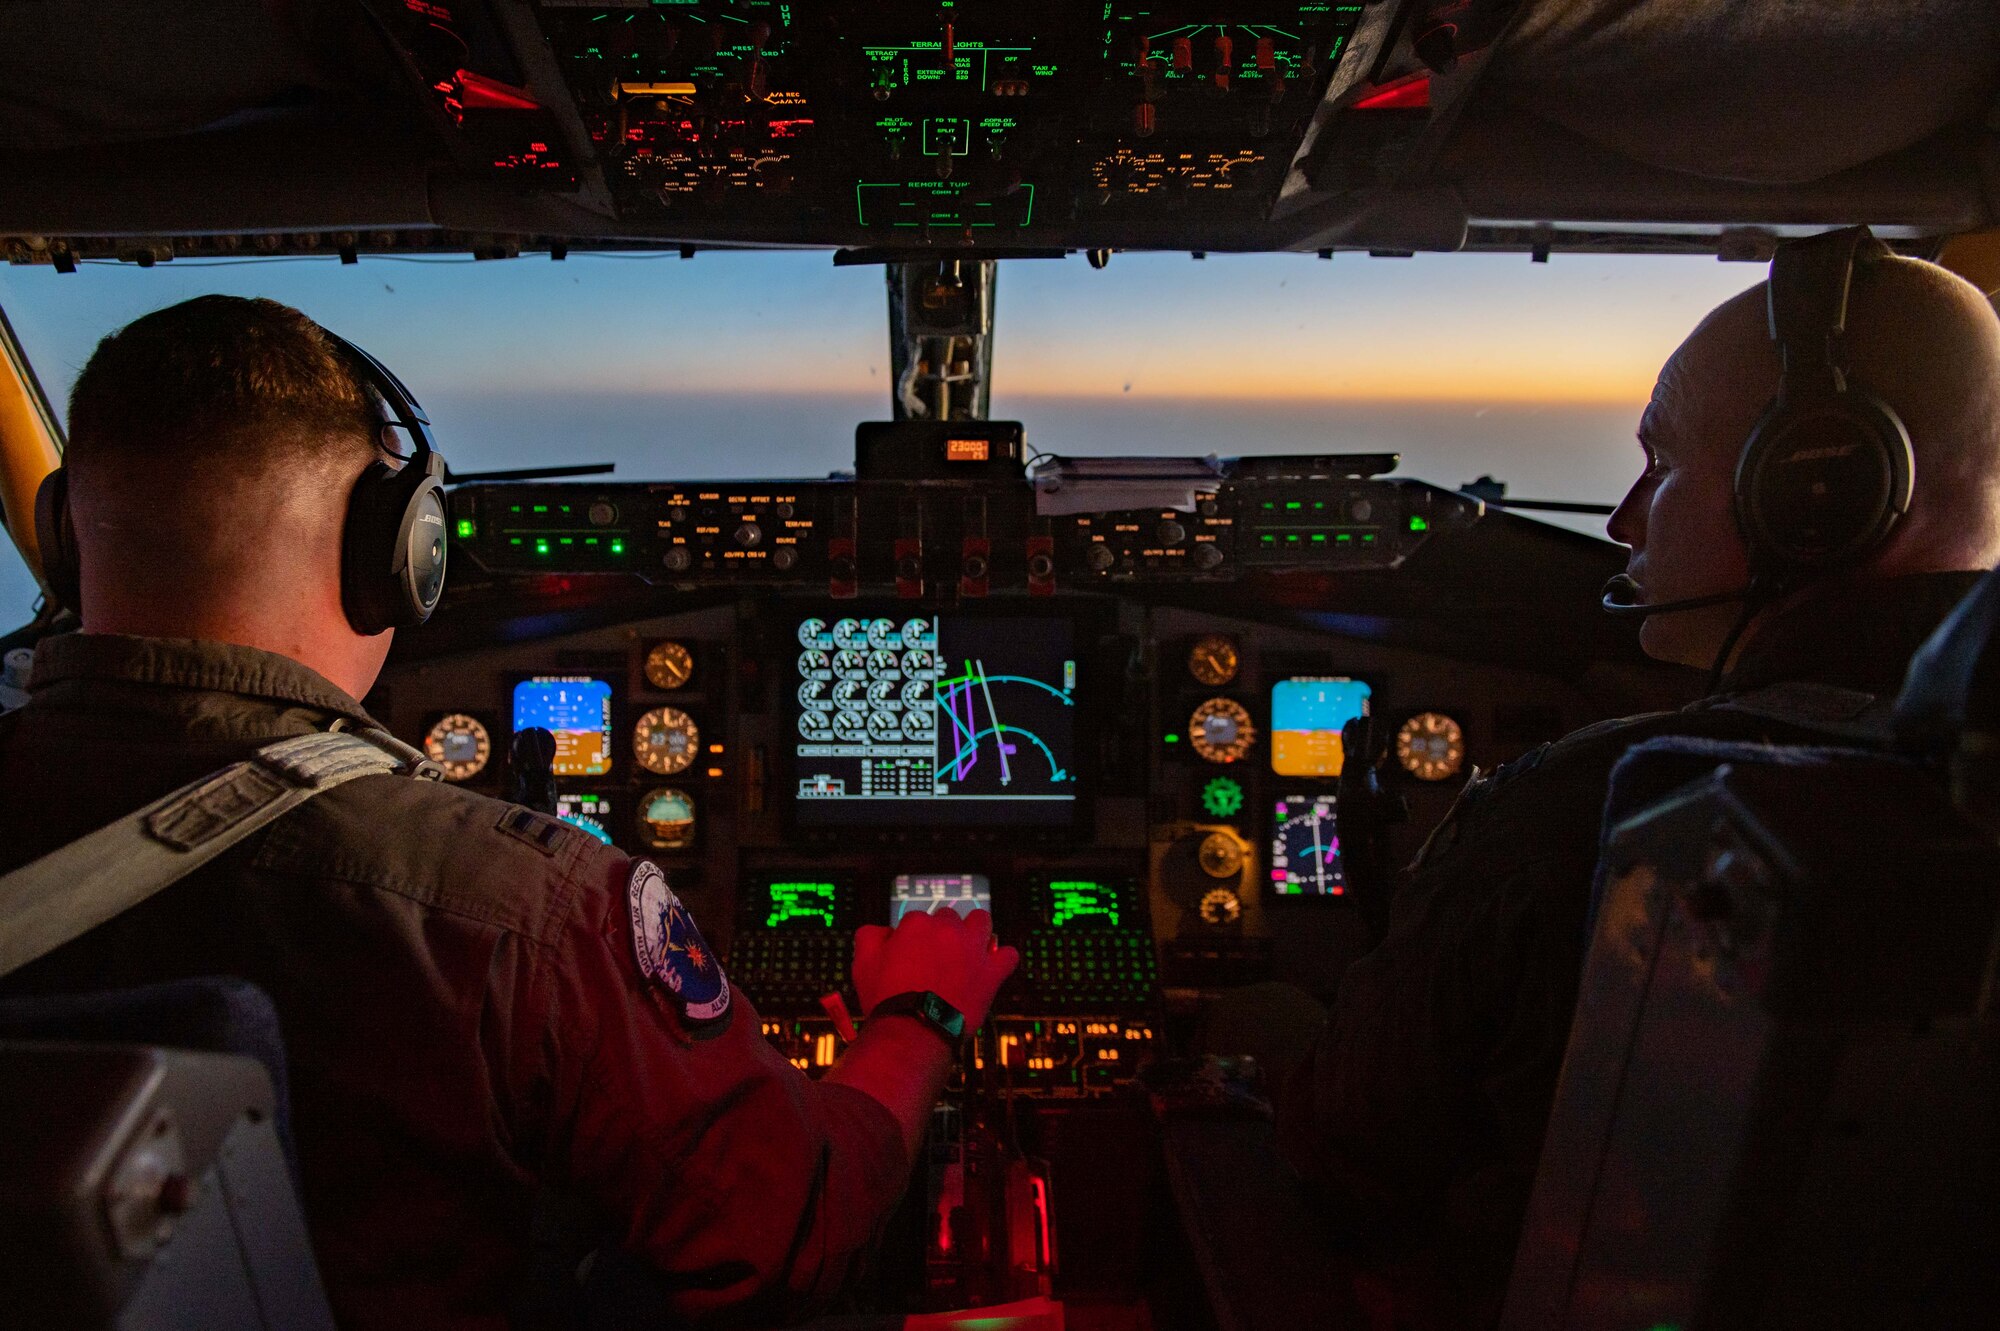 Two pilots steer a plane at sunset